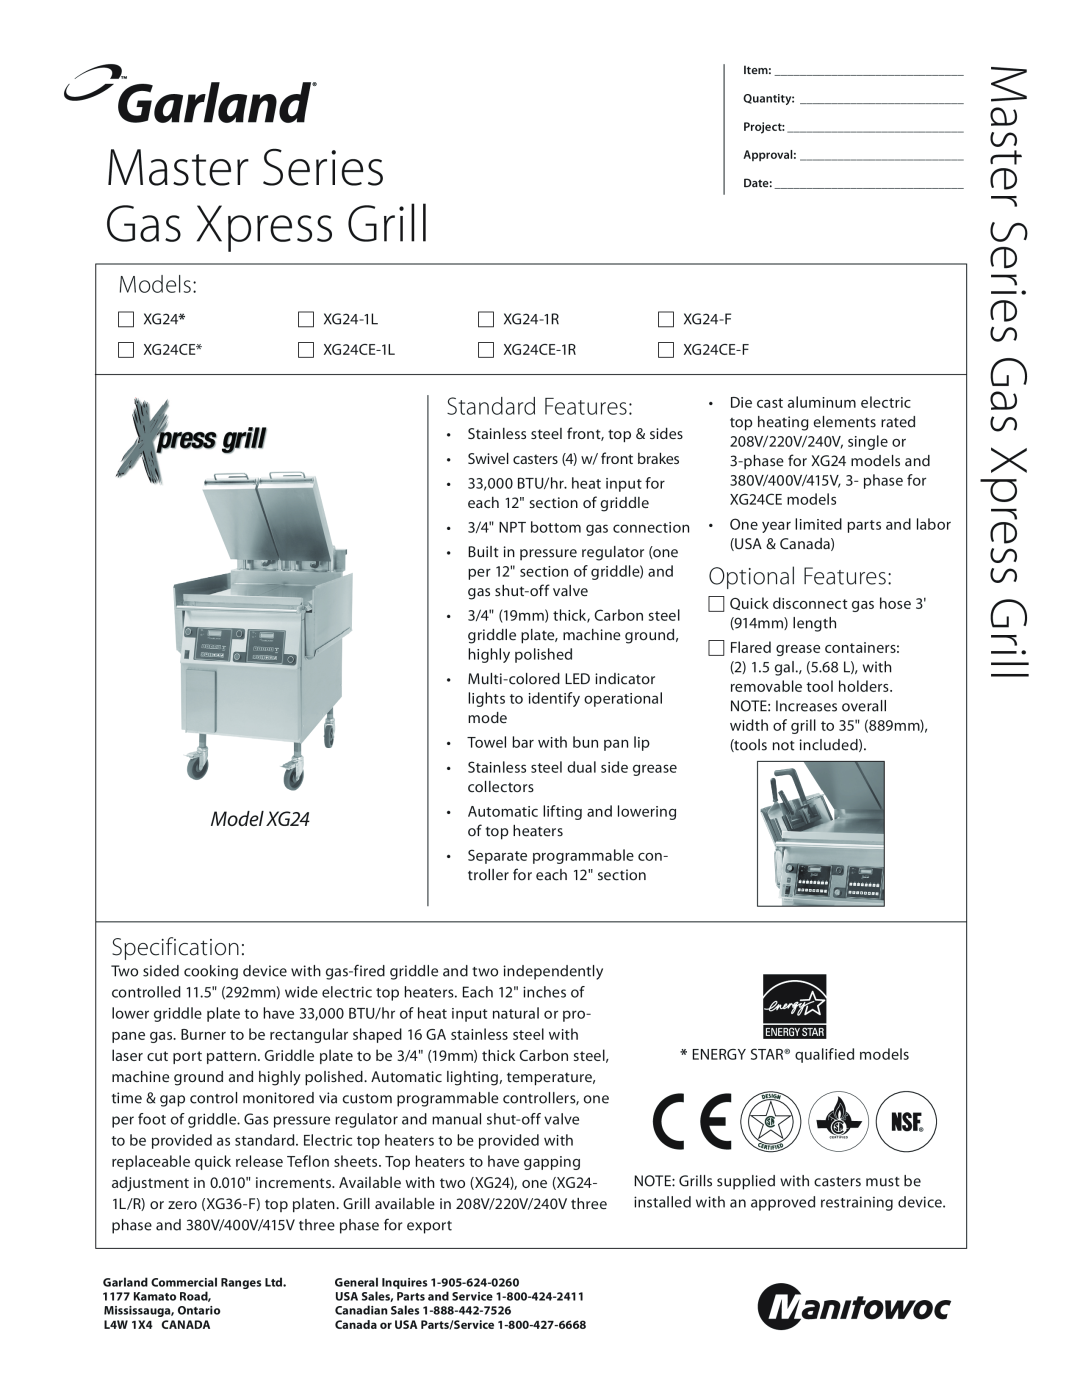 Garland XG24CE-1L manual Master Series Gas Xpress Grill, Models, Standard Features, Optional Features, Model XG24 